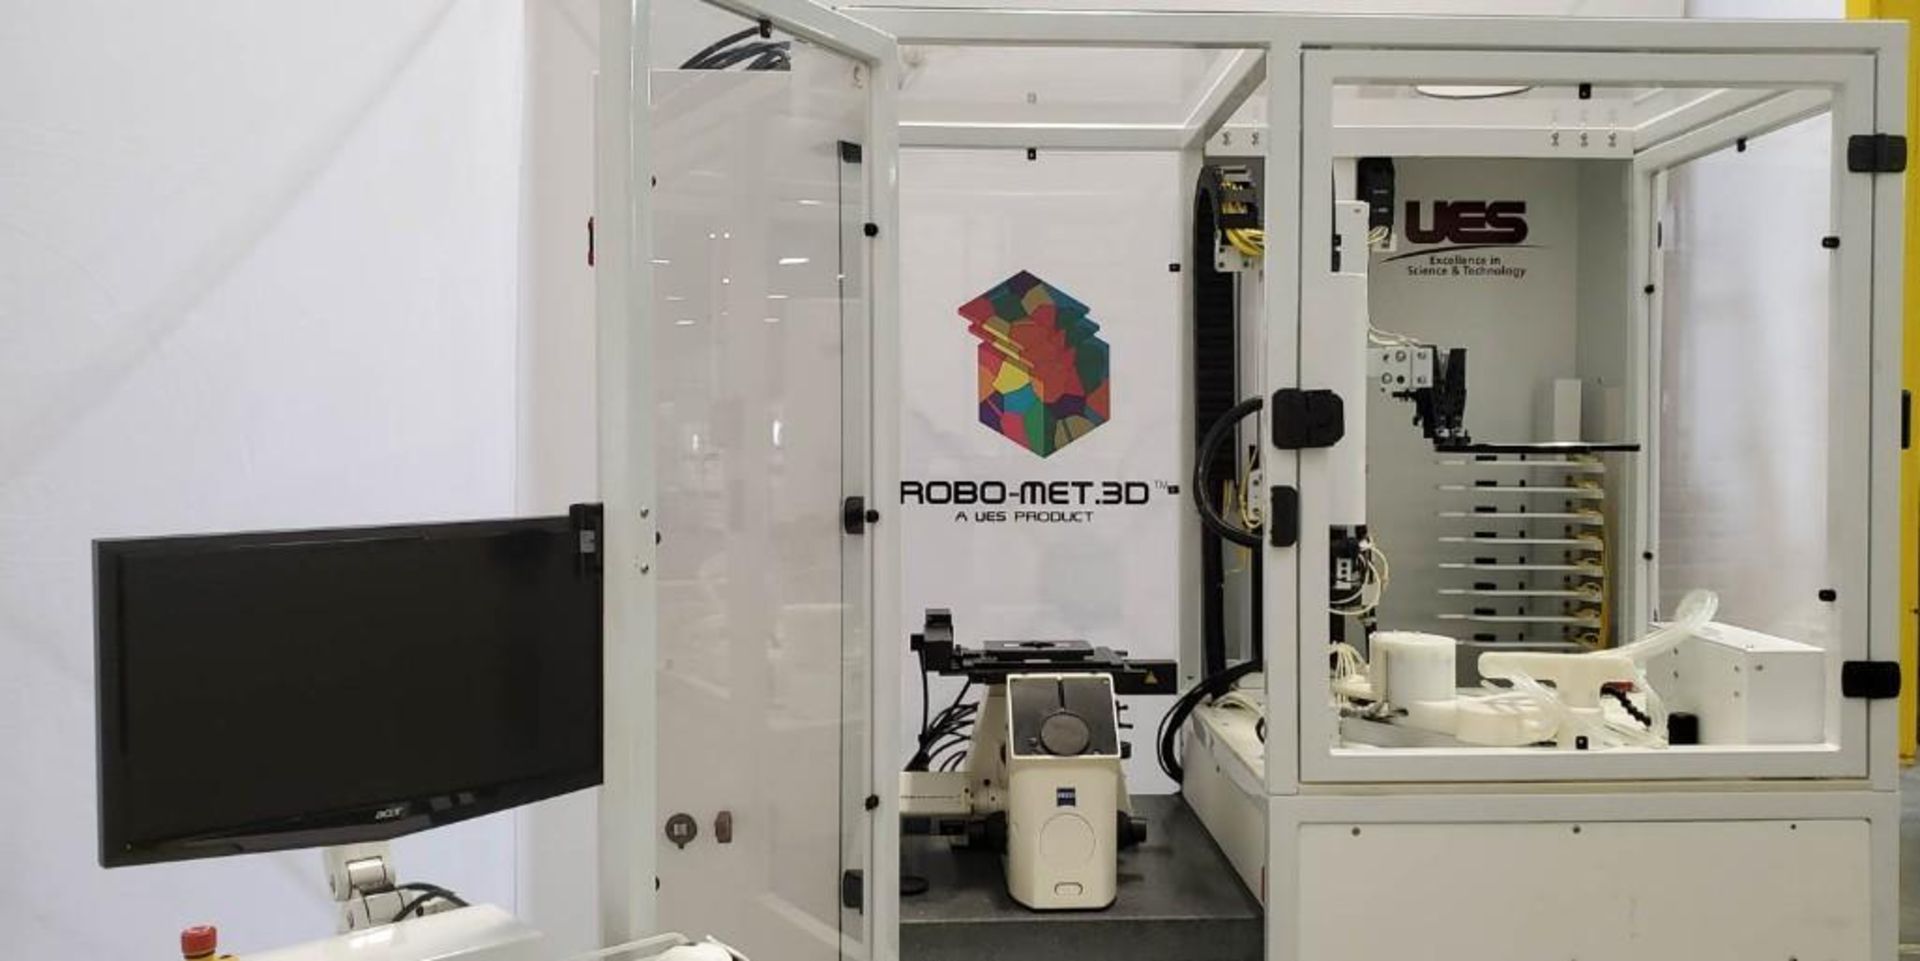 2013 UES Model Robomet 3D Automated Robotic Metallographic Preparation and 3D Photo System - Image 45 of 53